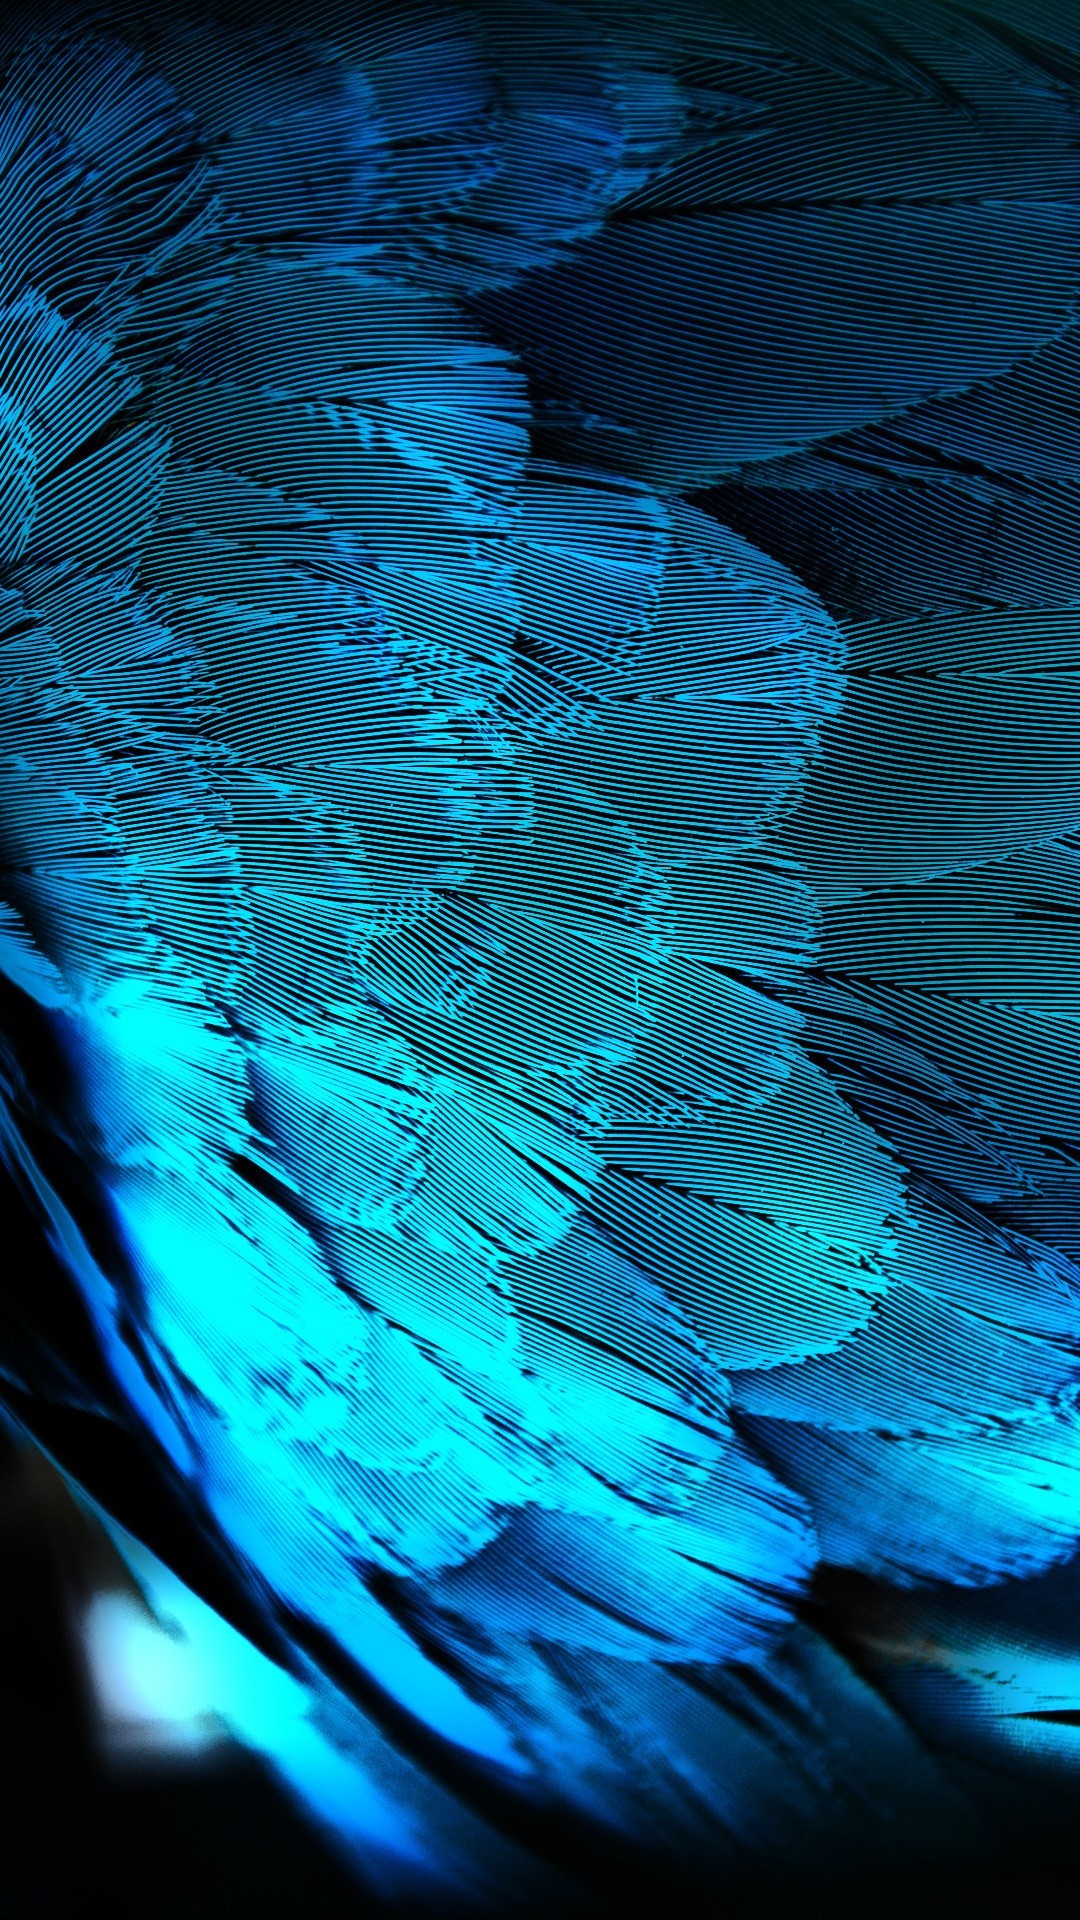 1080x1920 Blue HD Peacock Feathers Android Wallpaper